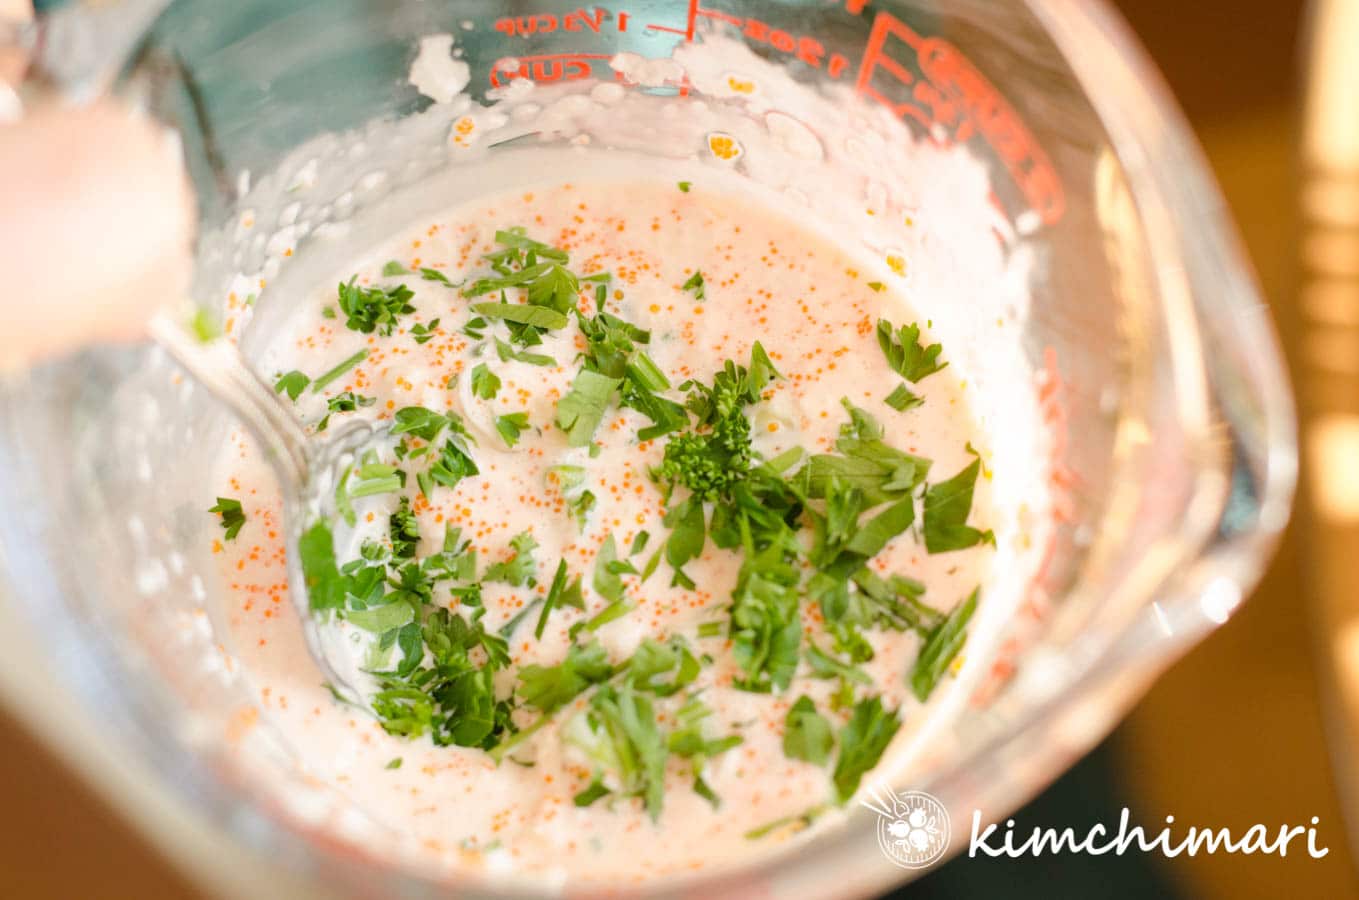 mixed mayo sauce with choped parsley added on top